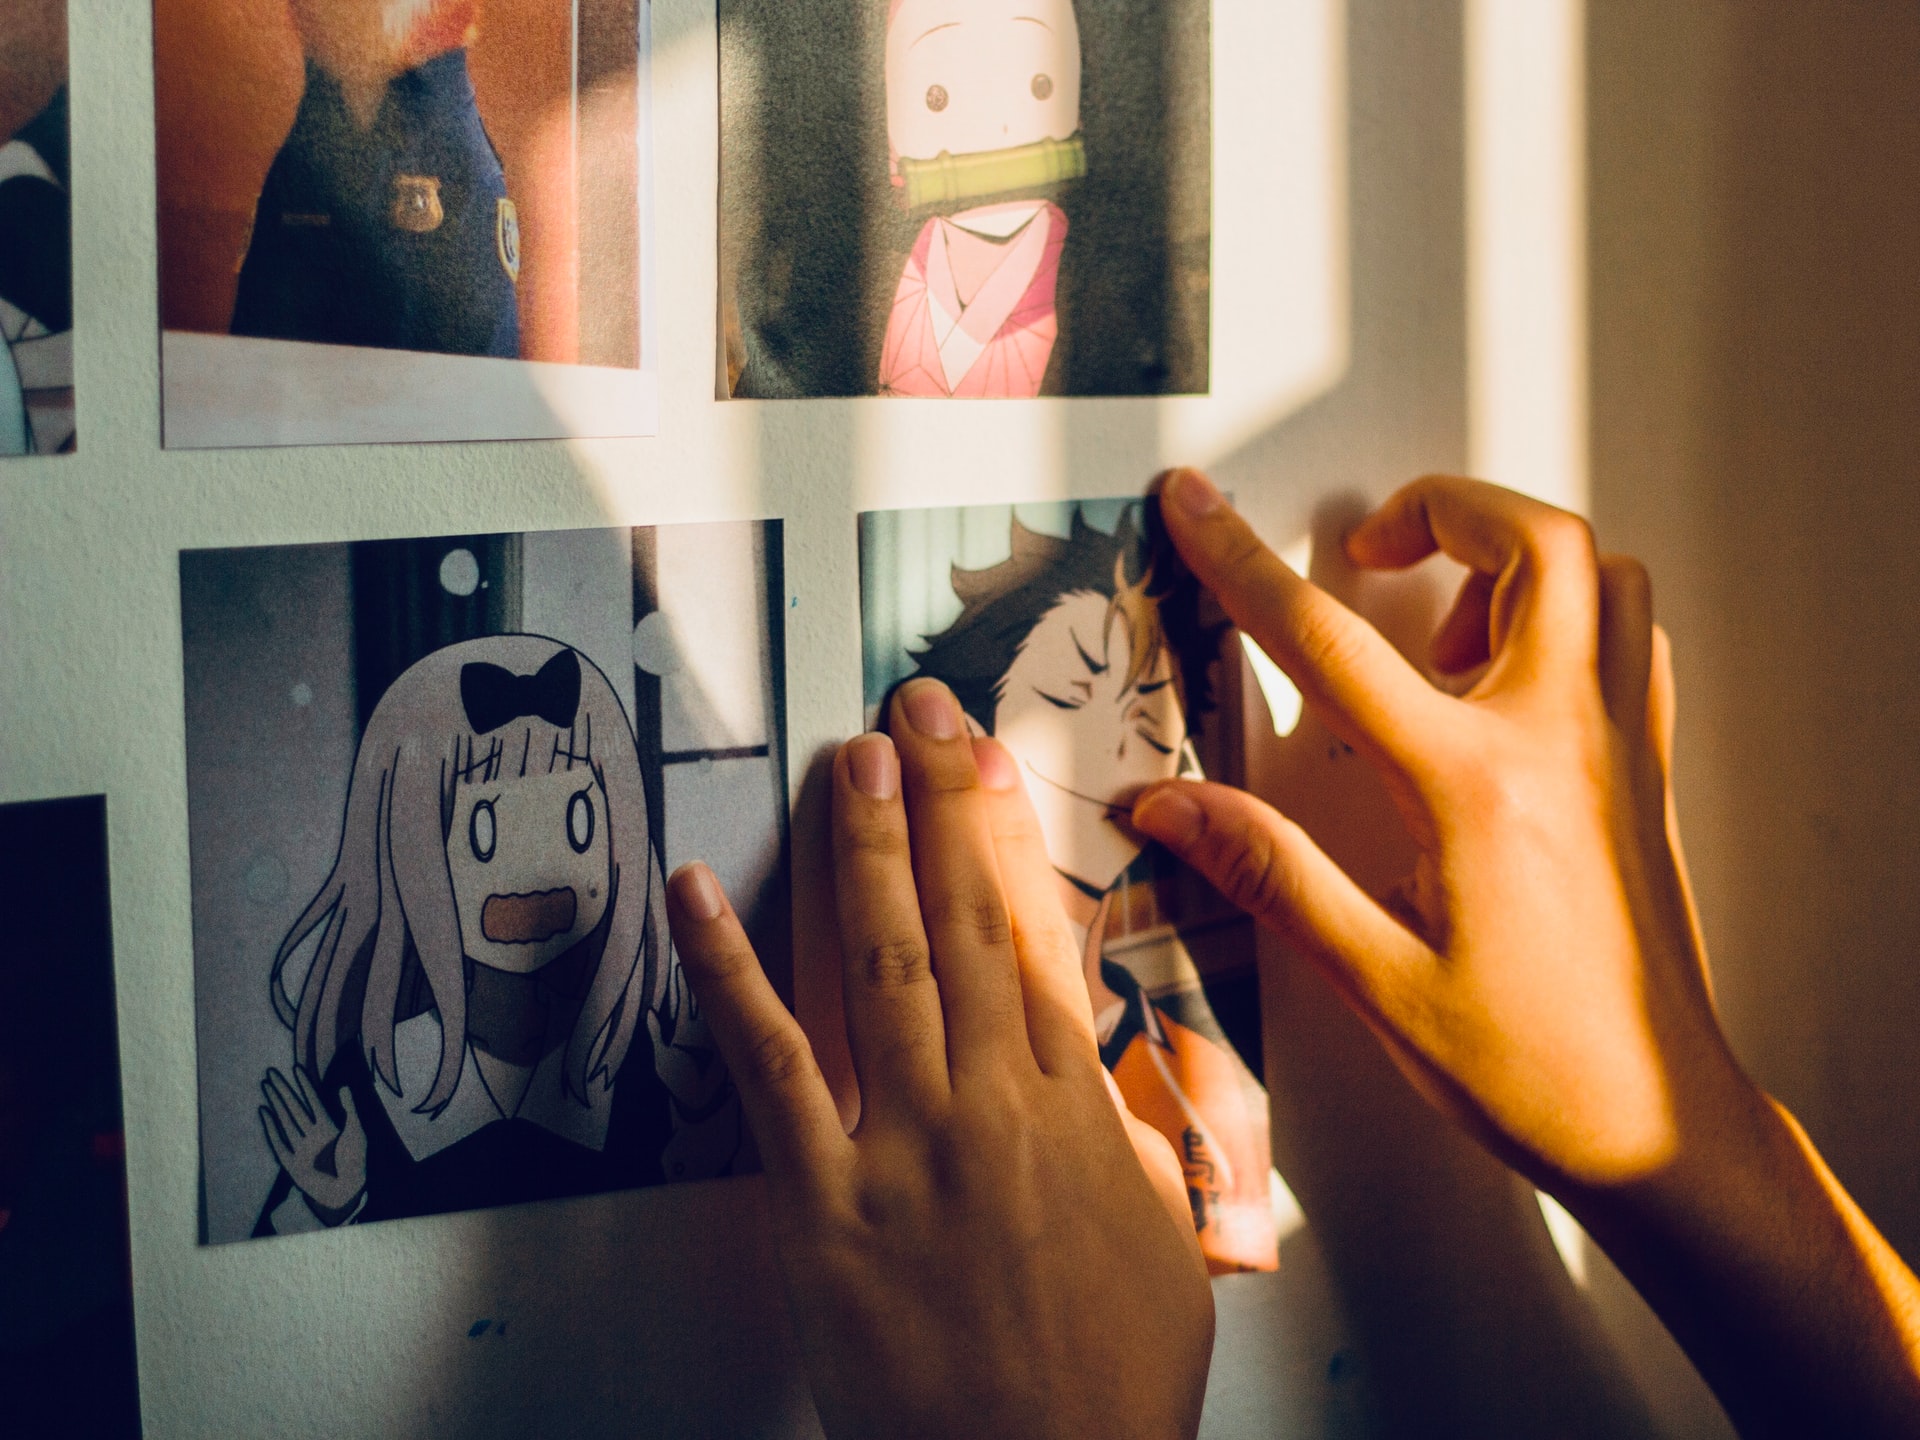 Printed photos of anime characters